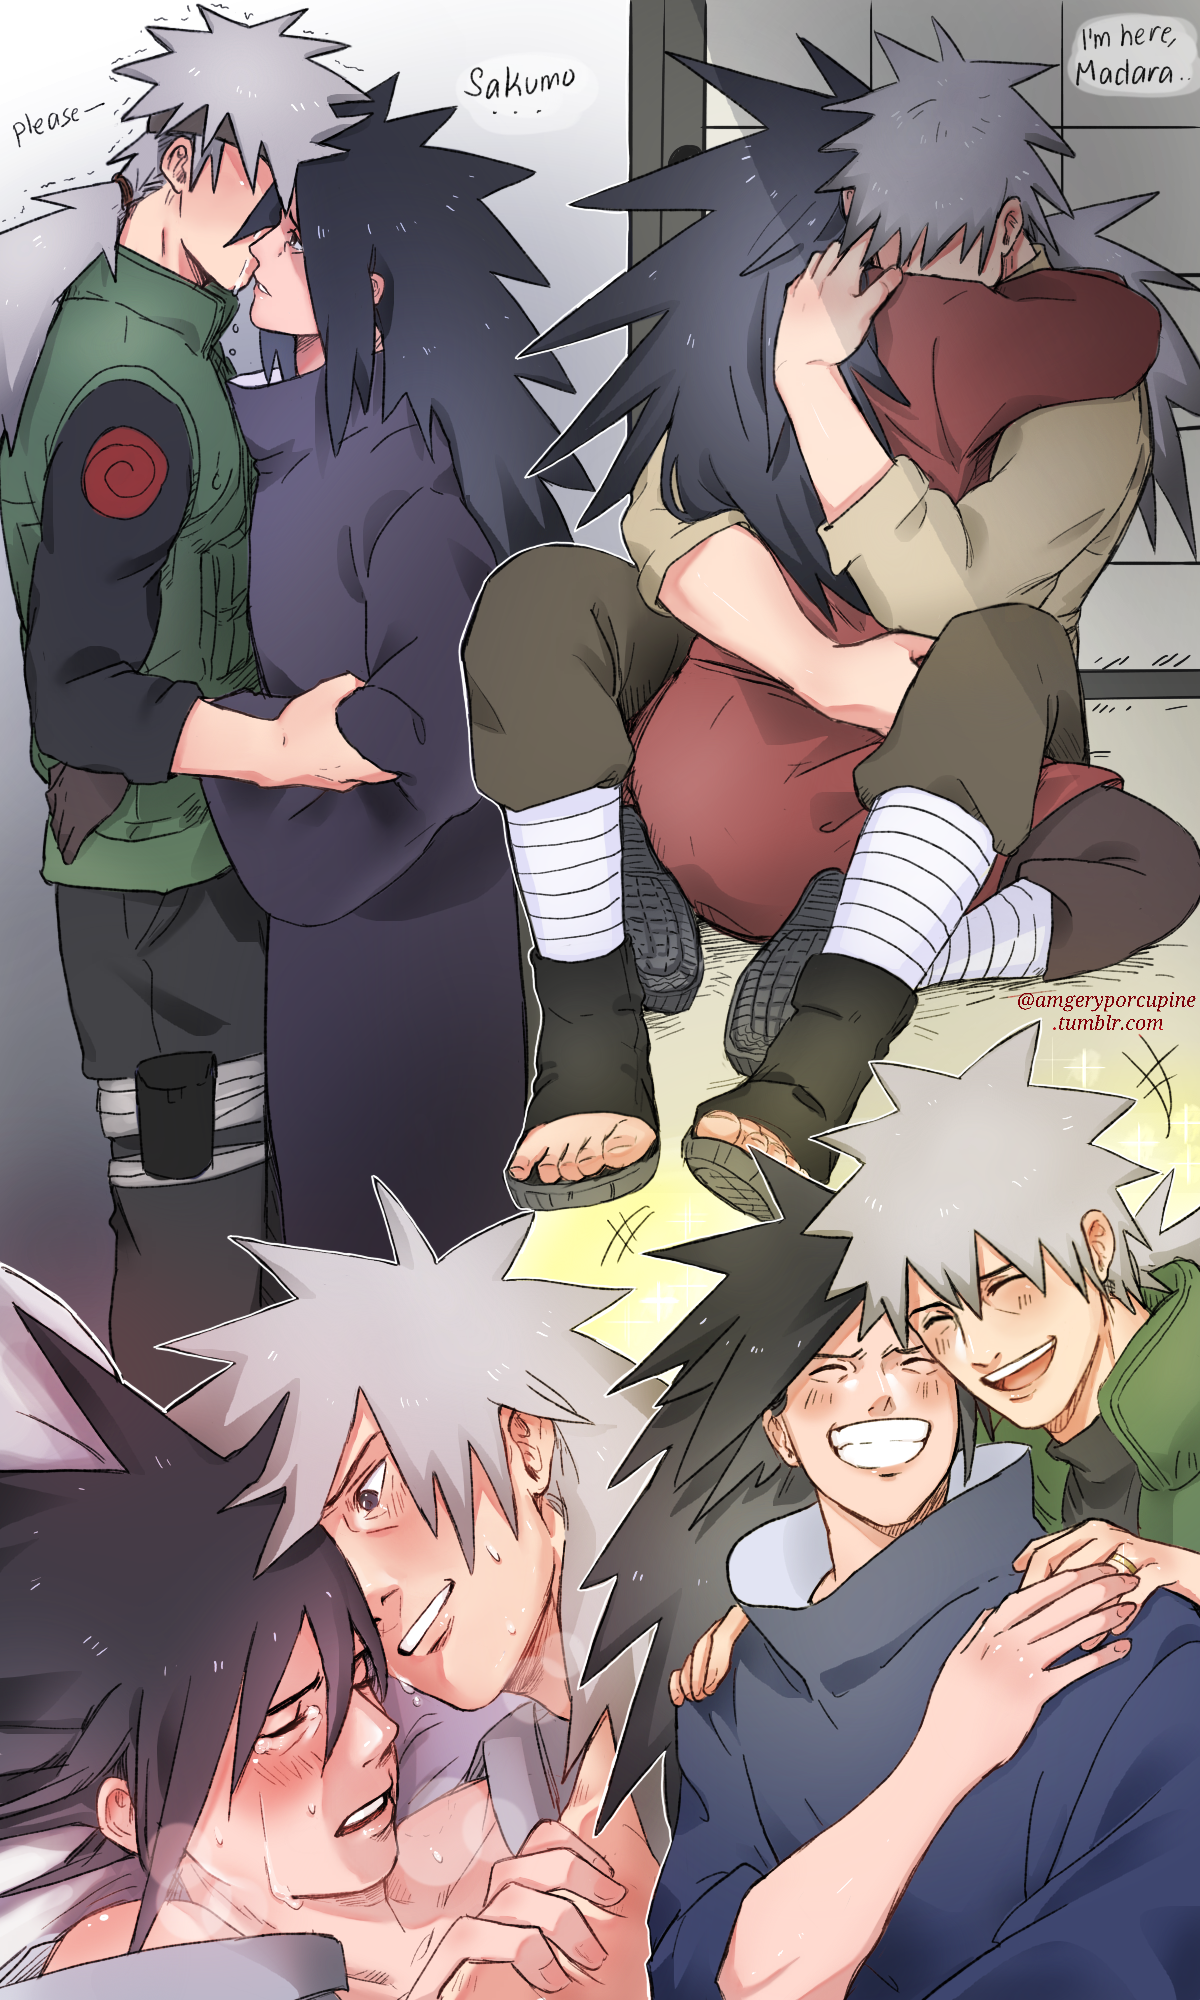 INTO THE PAST???(A NARUTO TIME TRAVEL FANFIC) - lowkey - Wattpad